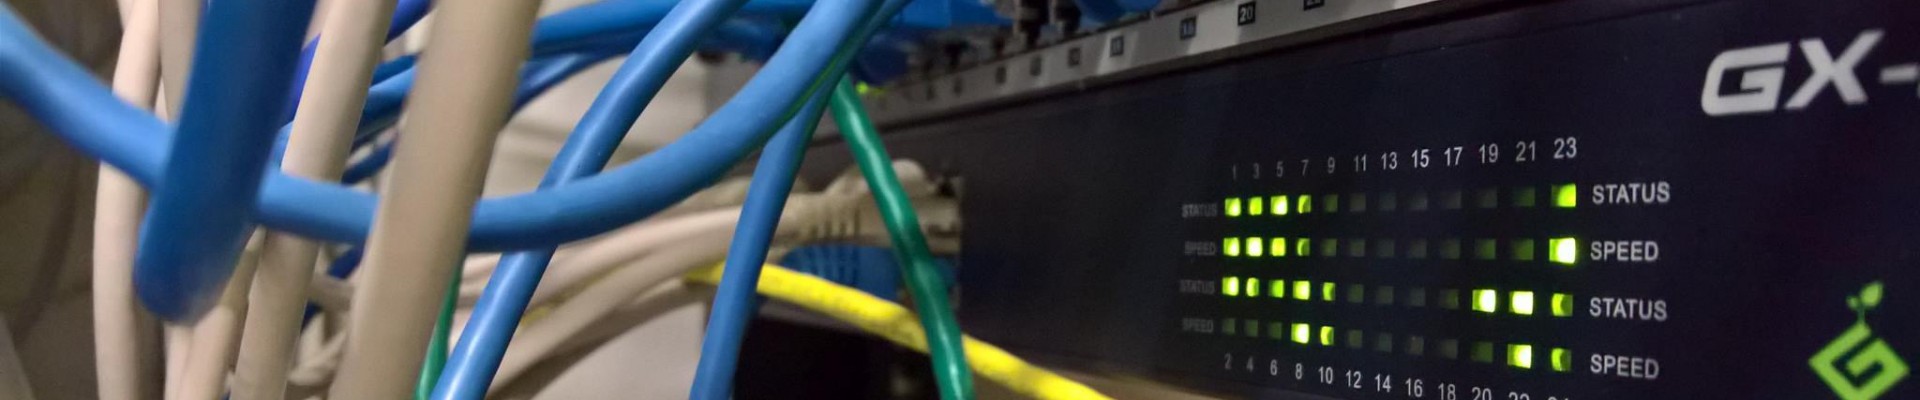 Network cabling, patch panel and switch - NAR Design